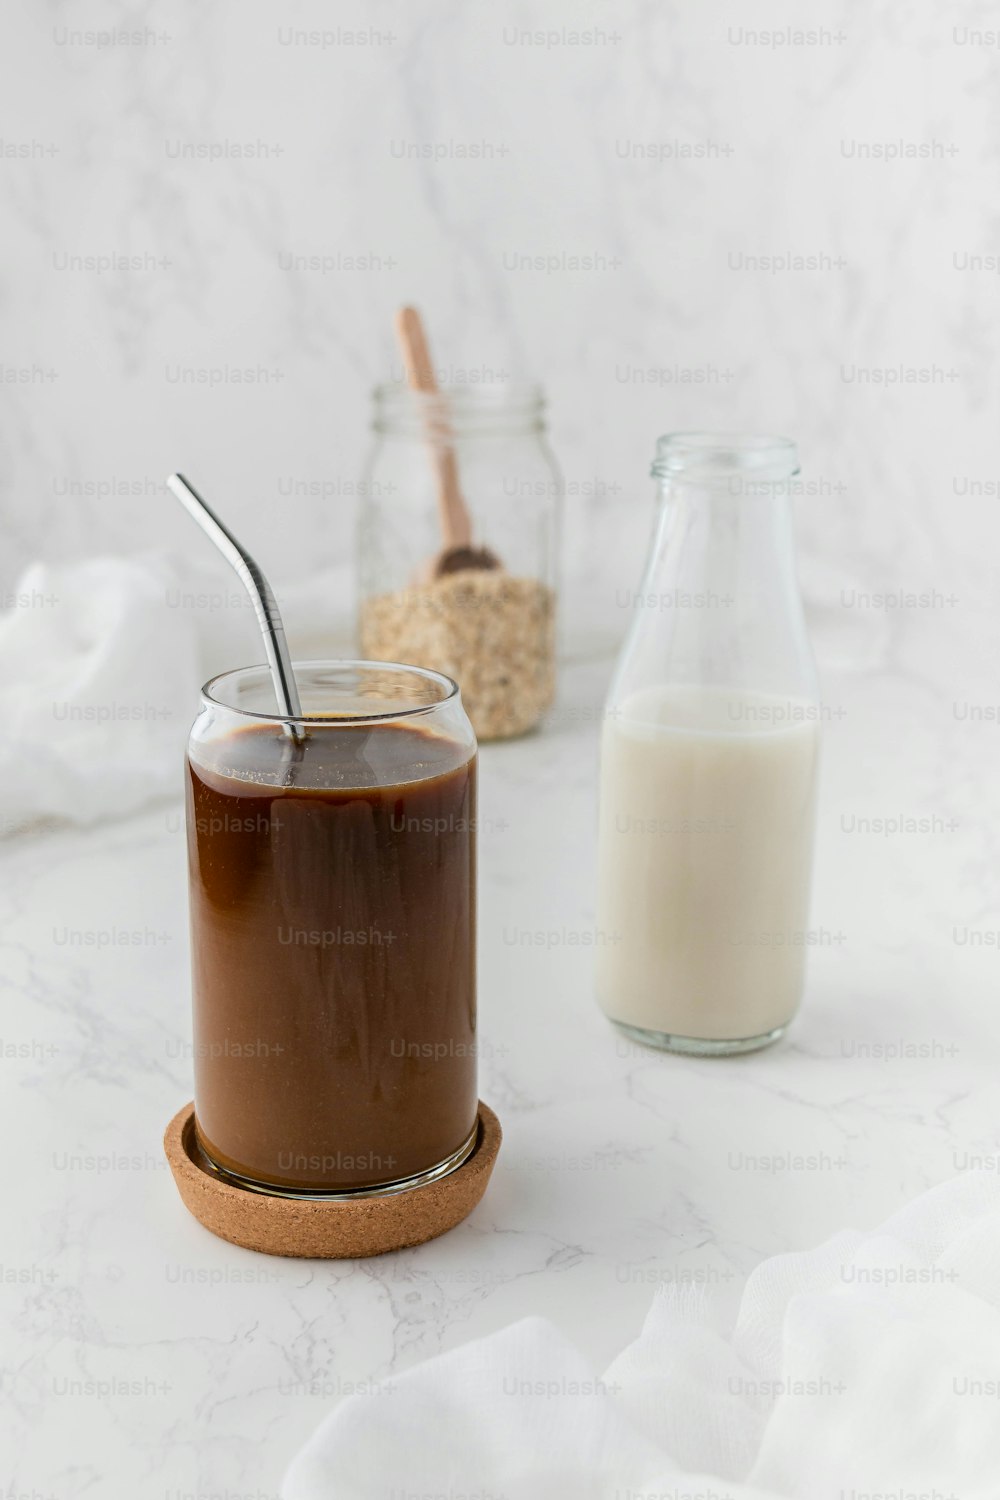 a jar of chocolate pudding next to a glass of milk